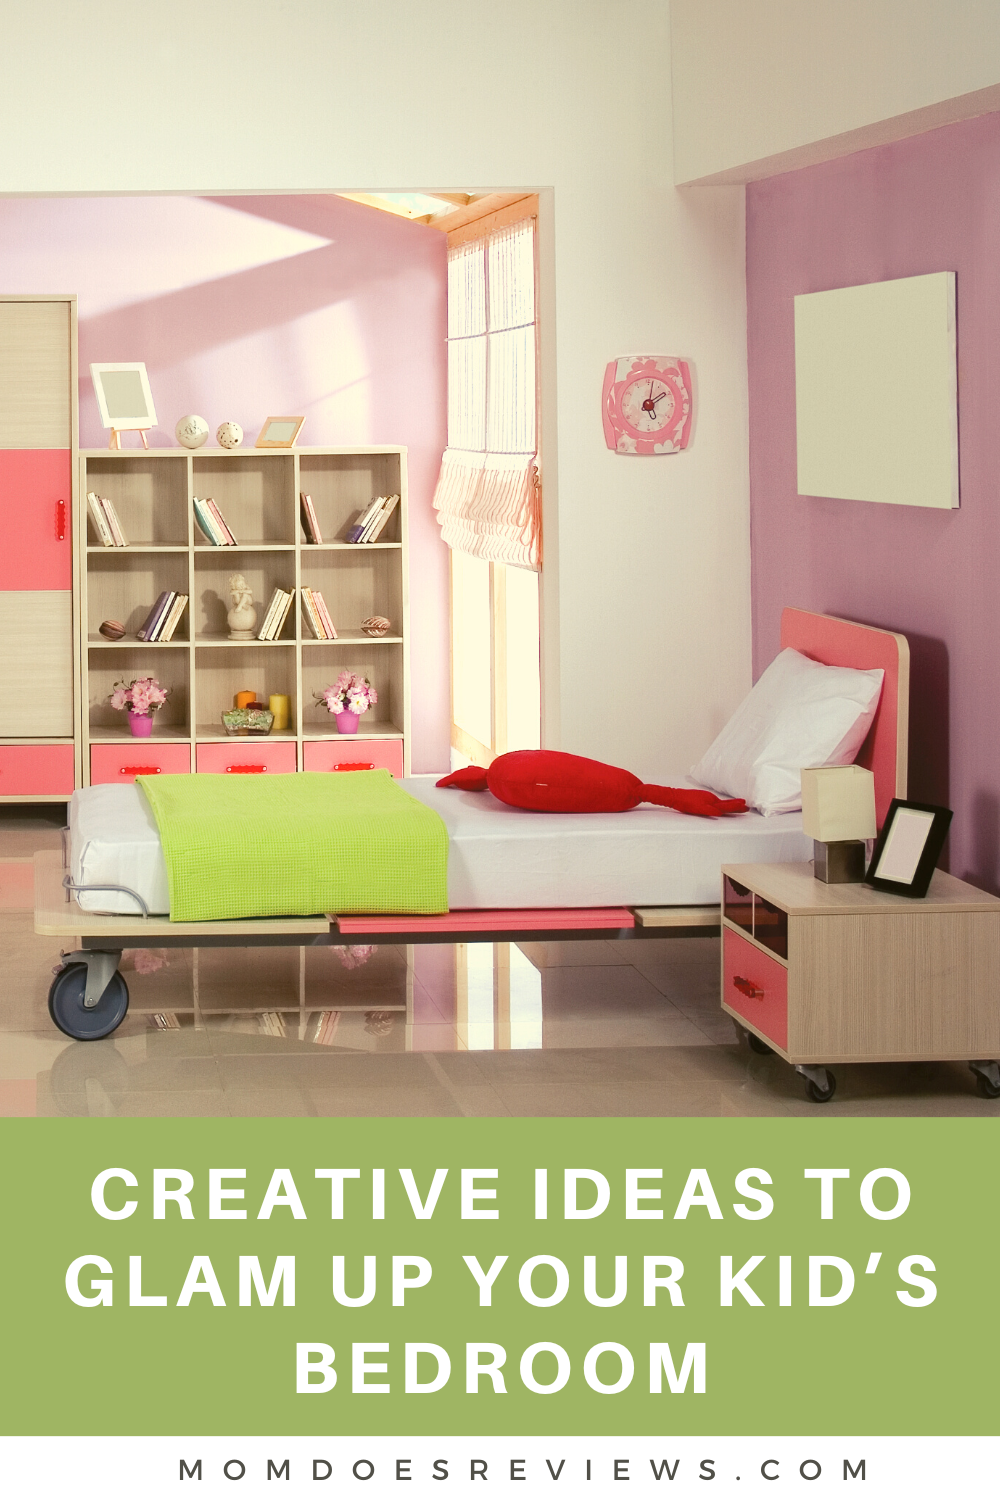 Creative Ideas to Glam up your Kid’s Bedroom